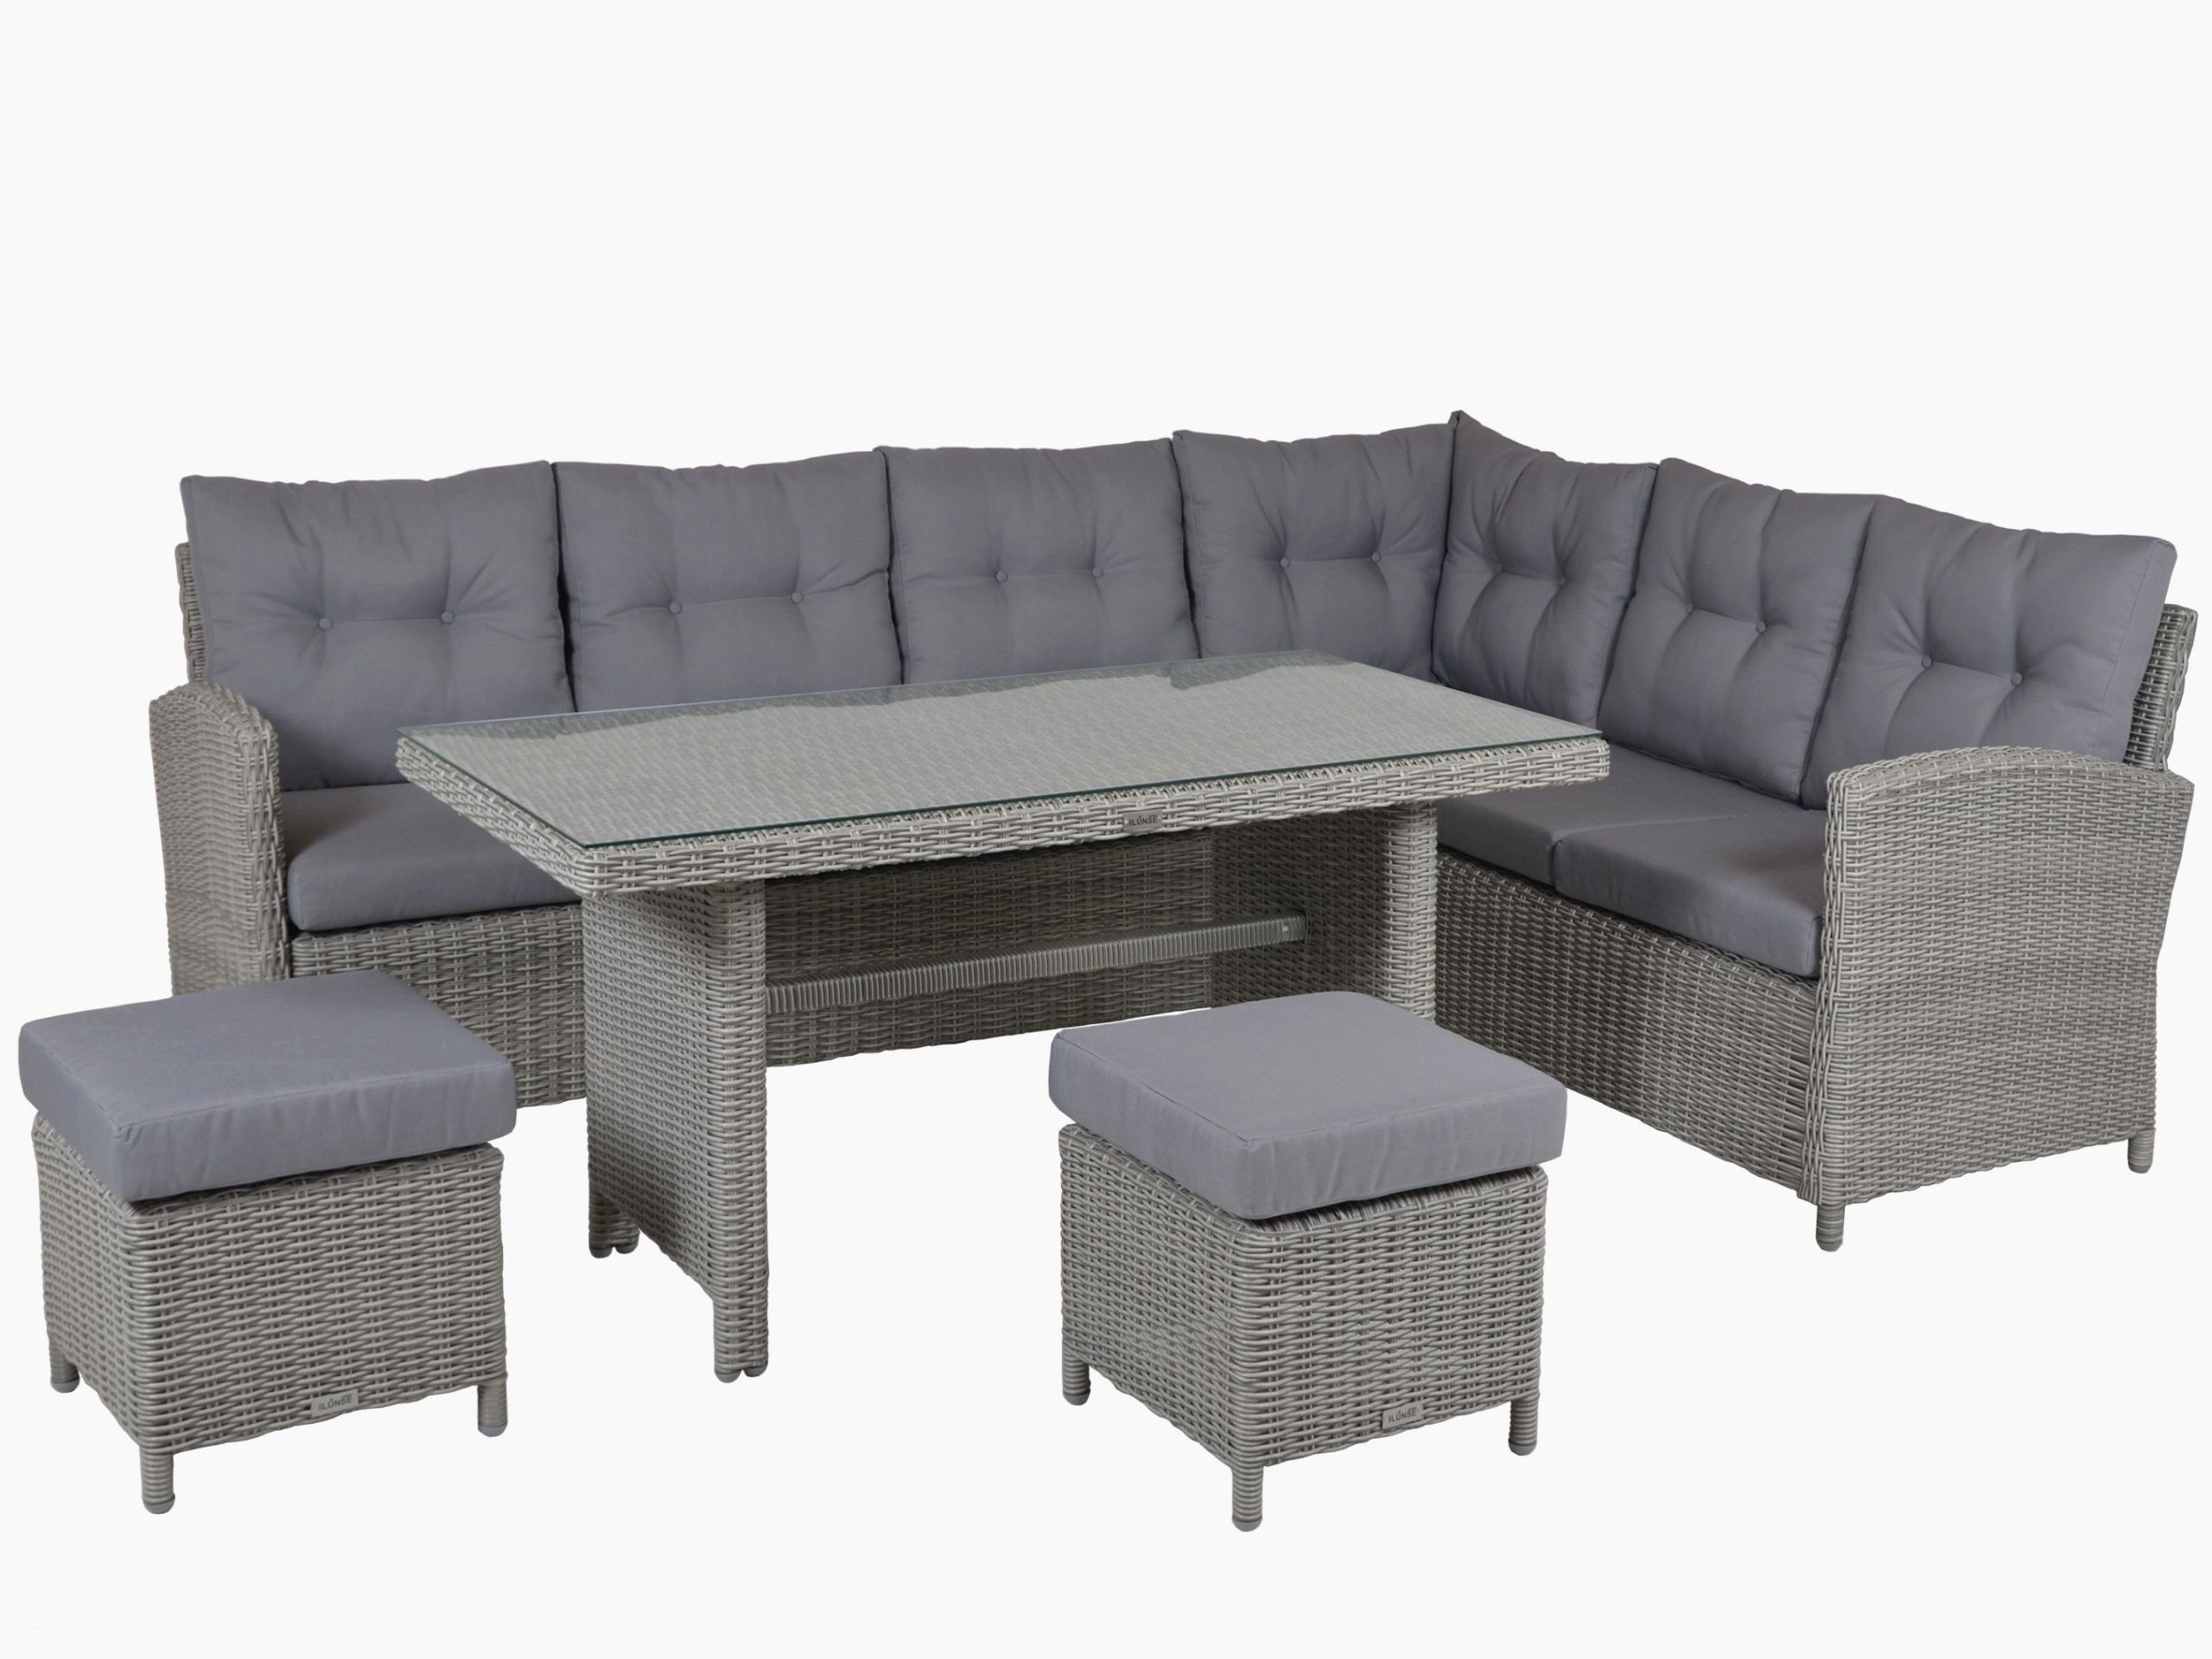 Table Inspirant White Wicker Patio Coffee Table Collection Clearance Patio